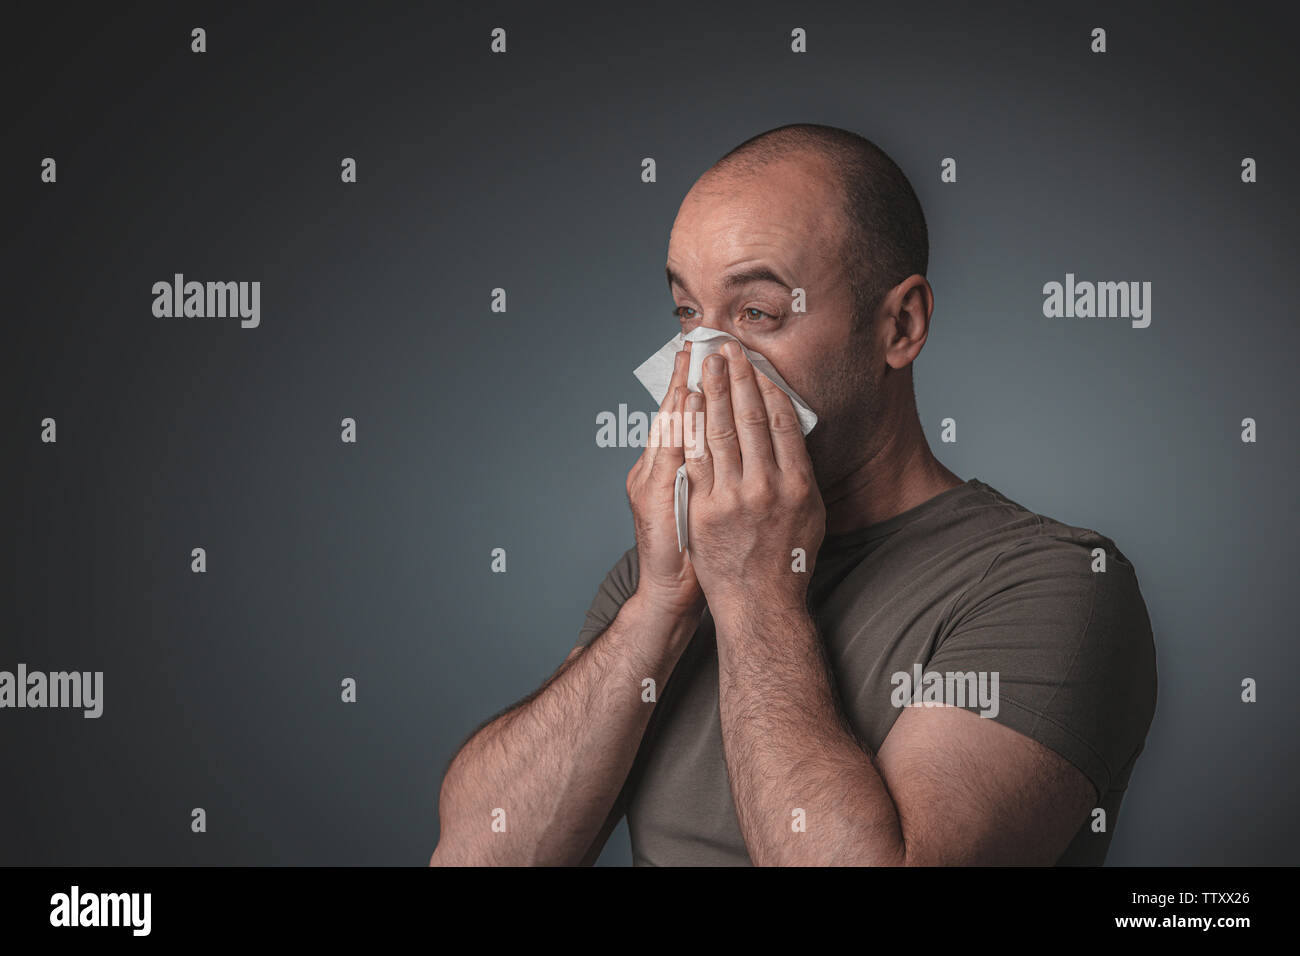 Portrait of a man blowing his nose with a tissue. Concept of health and malaise caused by physical discomfort. Stock Photo